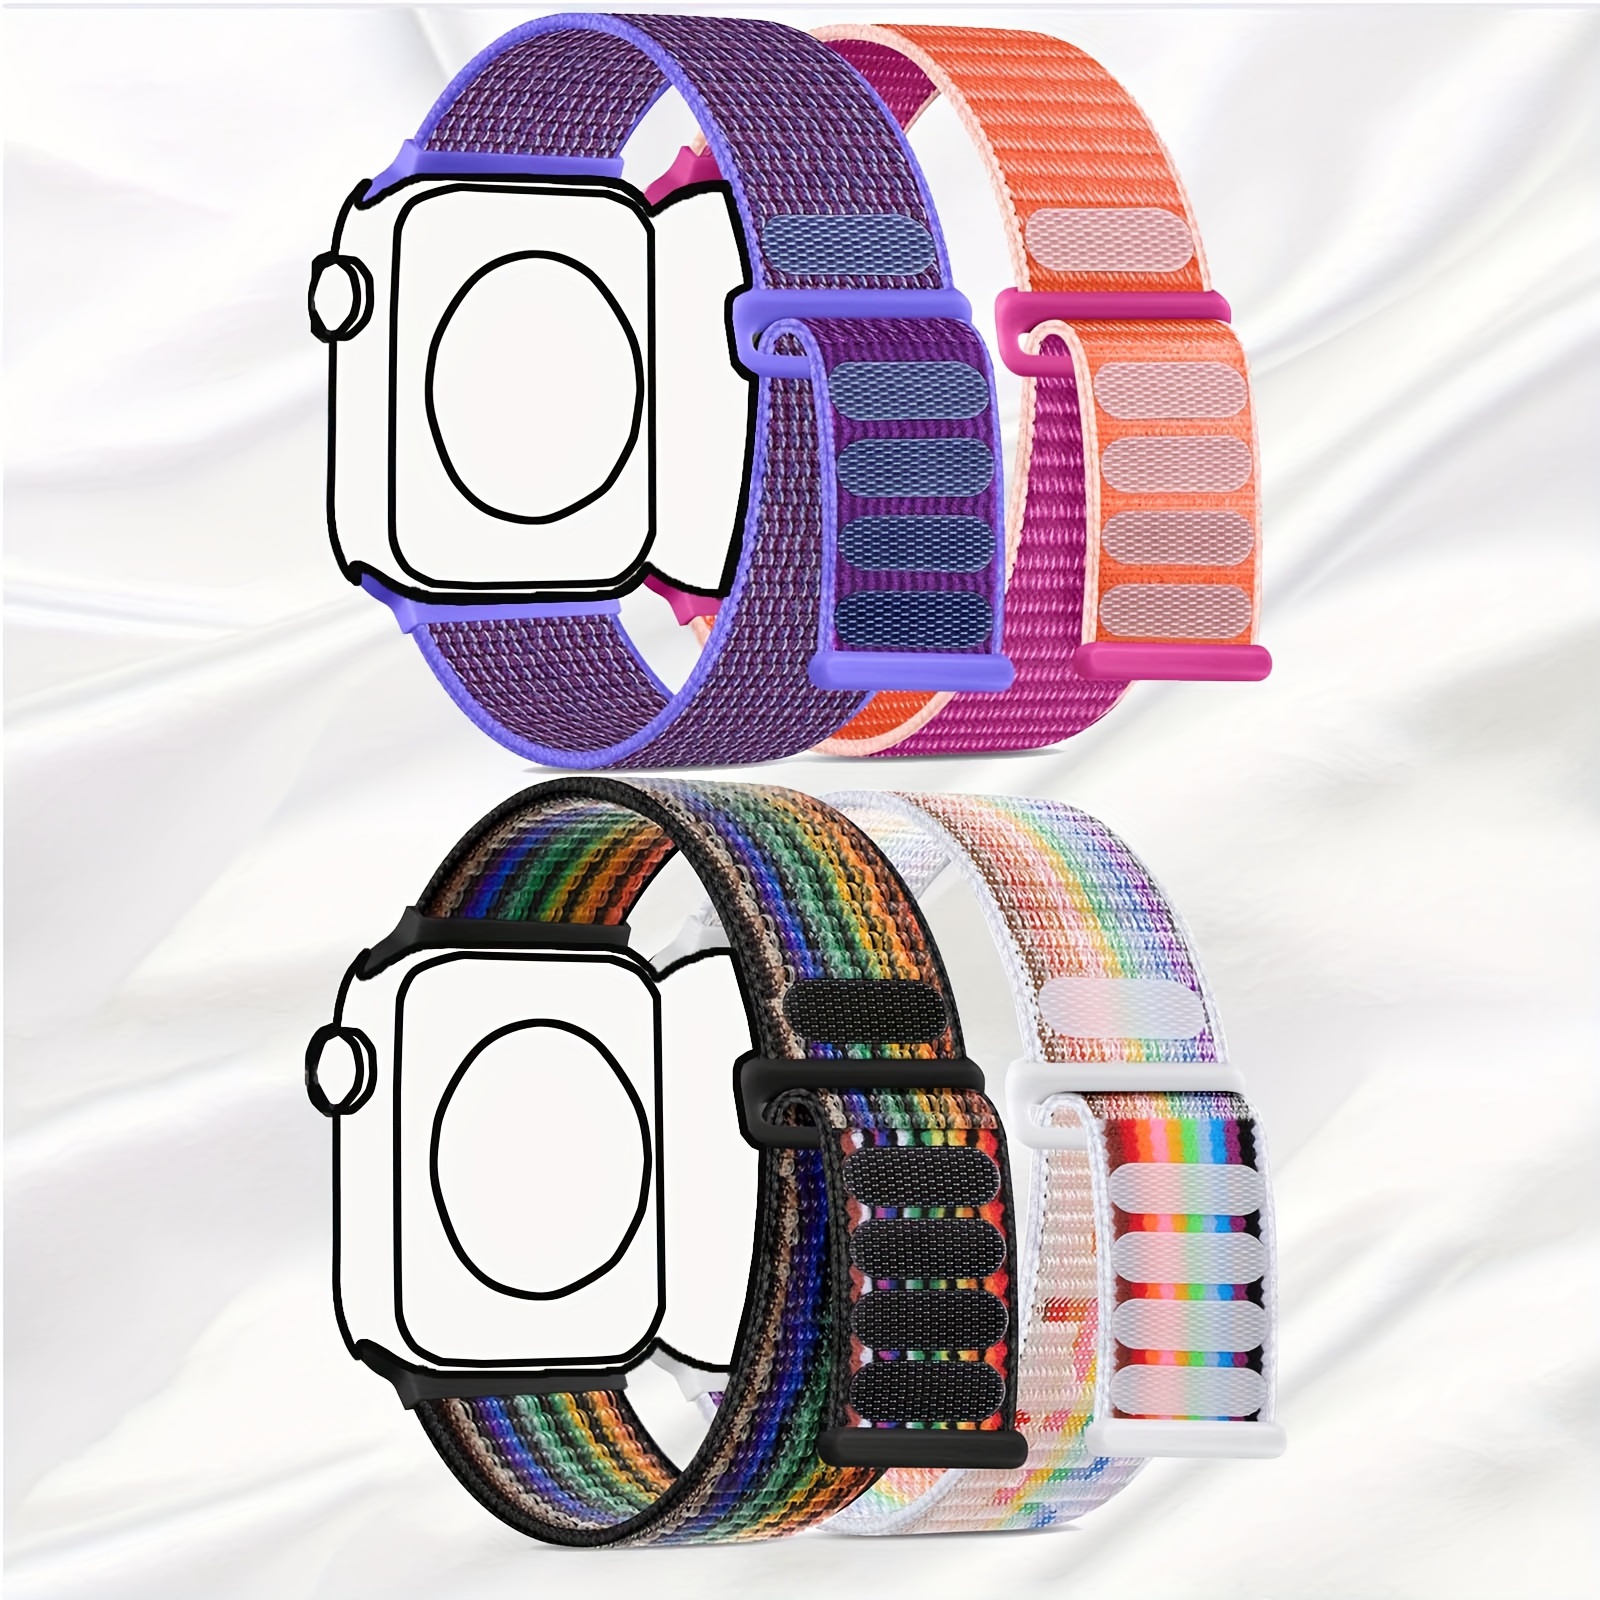 

2-pack Adjustable Nylon Solo Loop Bands For Watch 38mm-49mm - Stretchy, Braided Sport Straps With Magic Tape Closure - Compatible With /se2/series 1-9 Watch Strap Watchbands